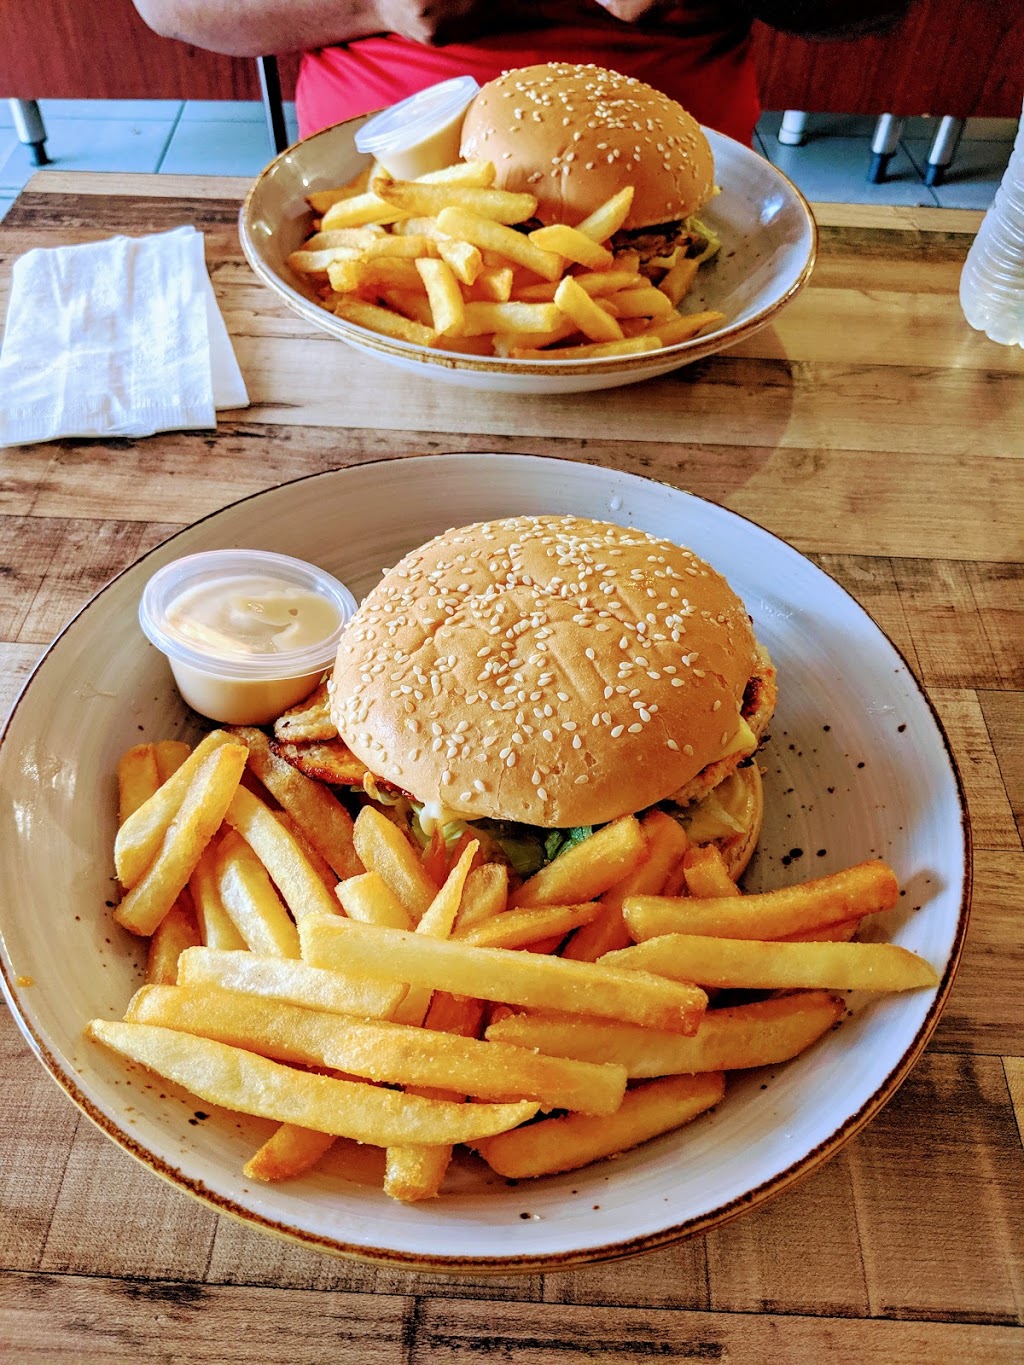 Ole Portuguese Style Chicken and Burgers | 442 Bunnerong Rd, Matraville NSW 2036, Australia | Phone: (02) 9661 8055